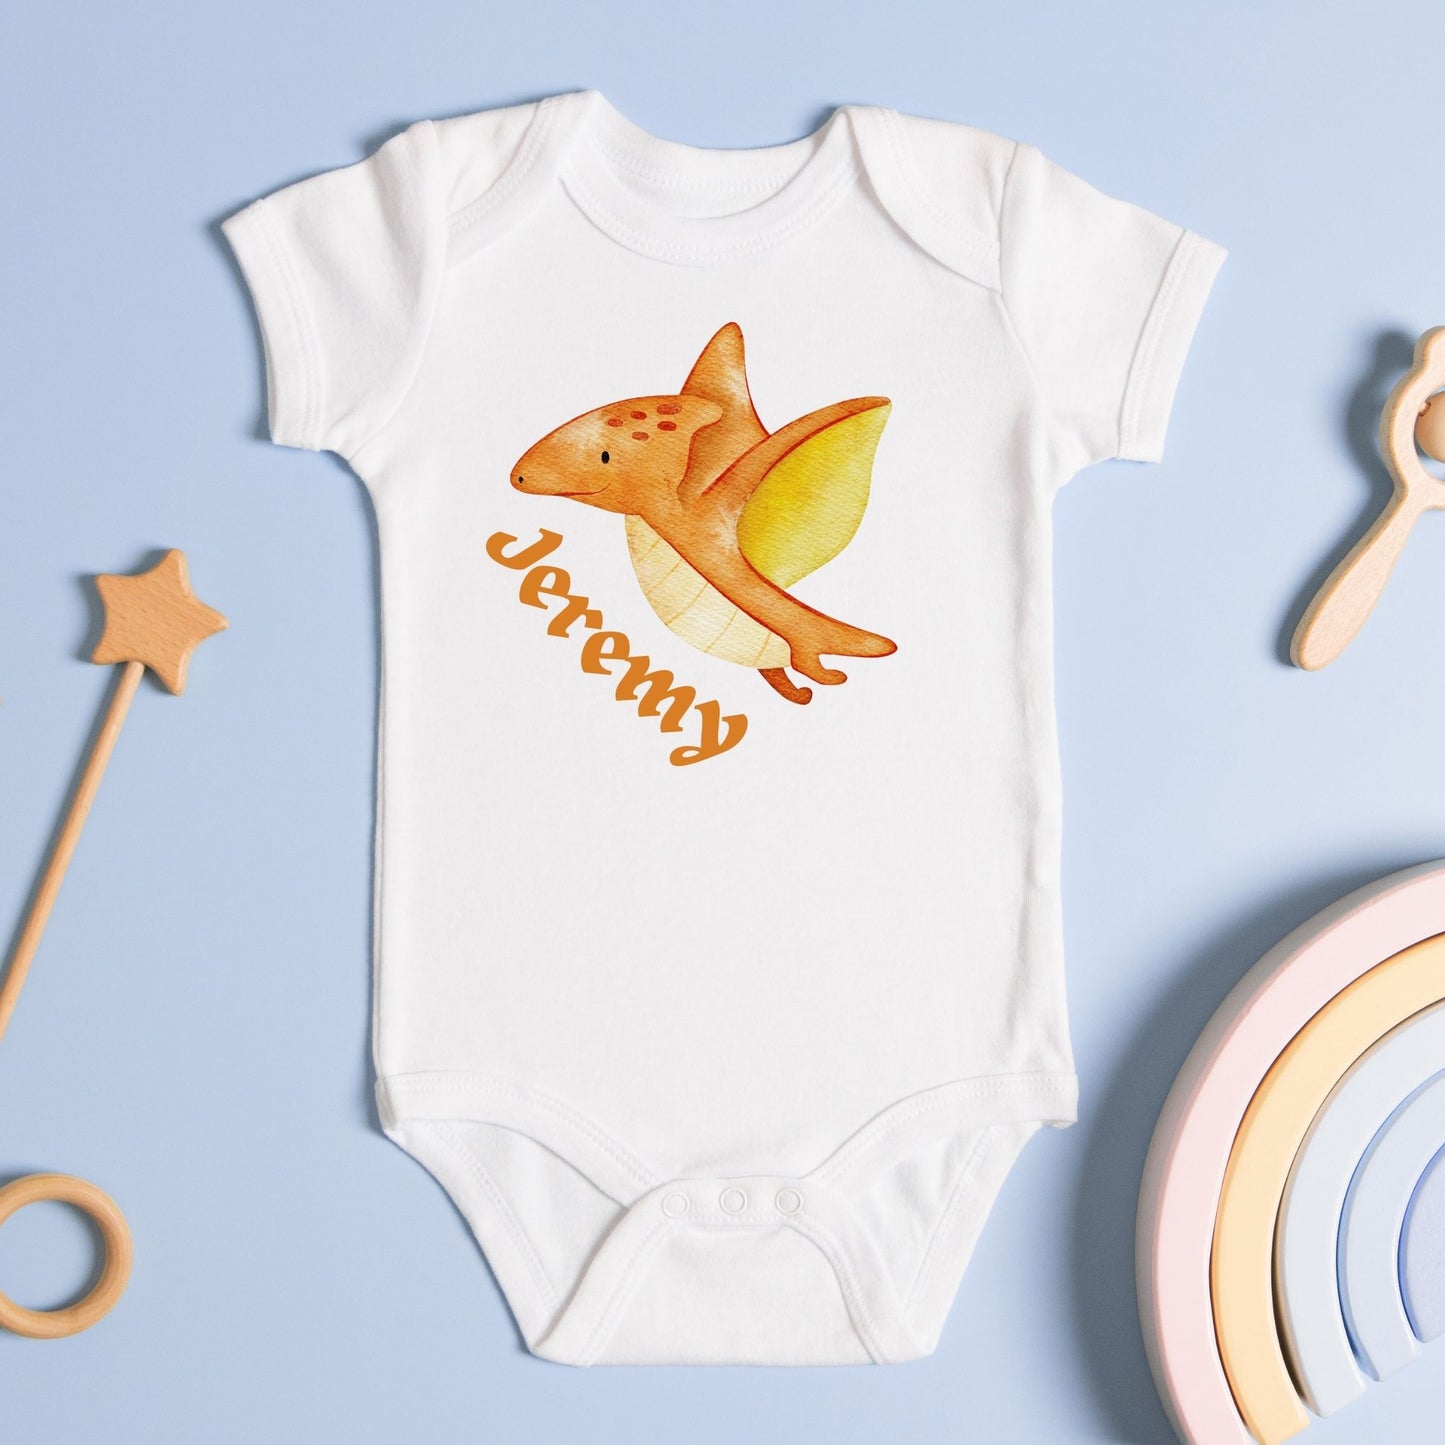 Personalized Name "Fly-High Dino" Baby Romper